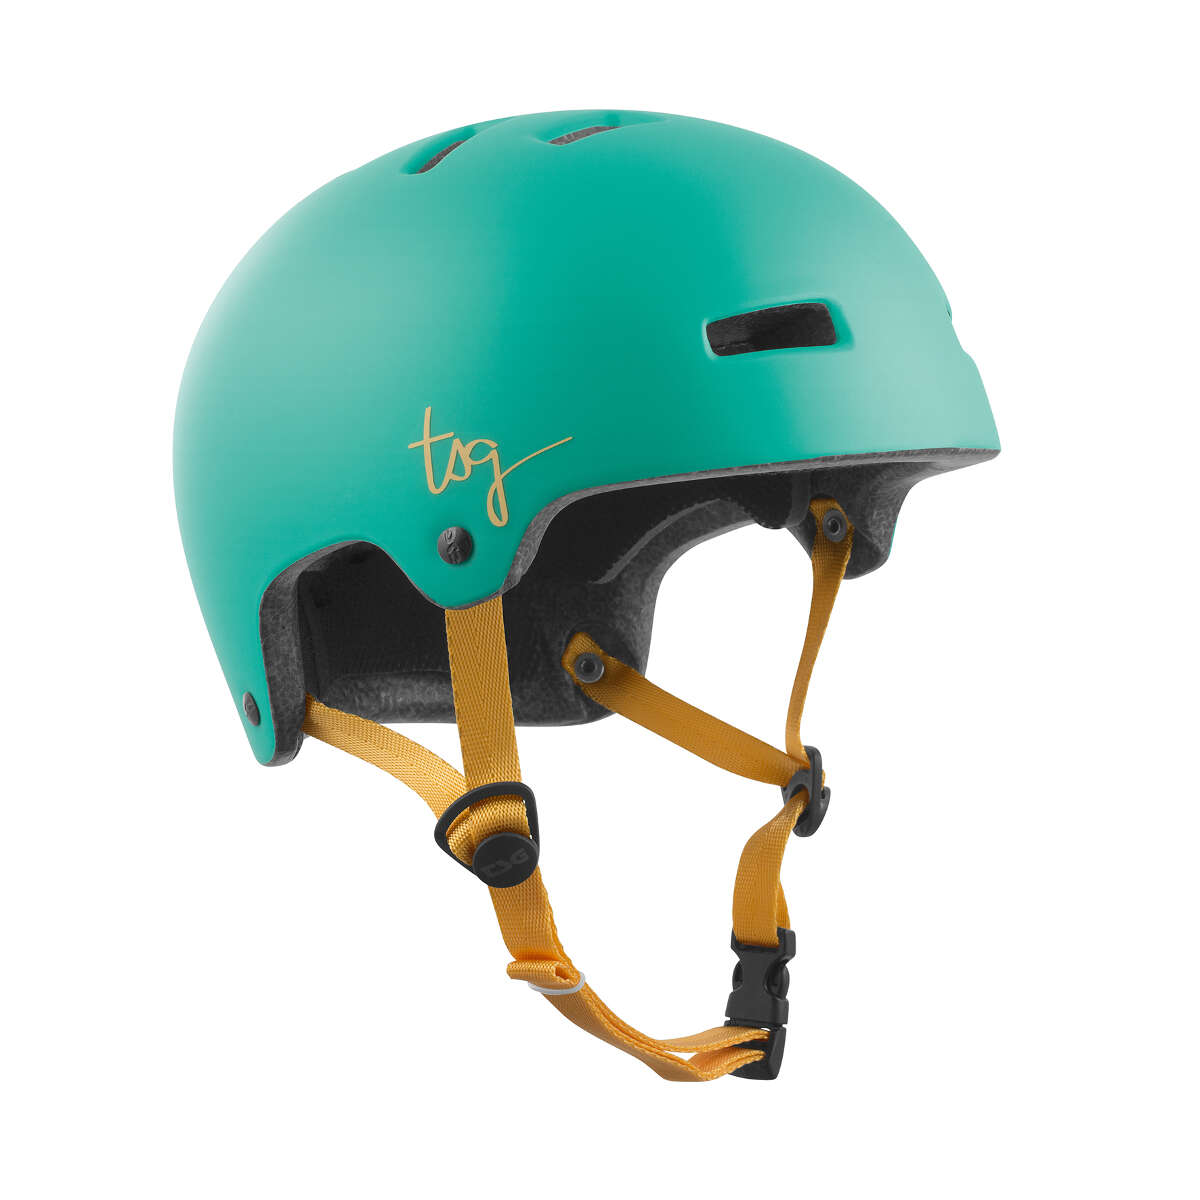 TSG Casque BMX/Dirt Ivy Solid Color - Satin Jade Turquoise